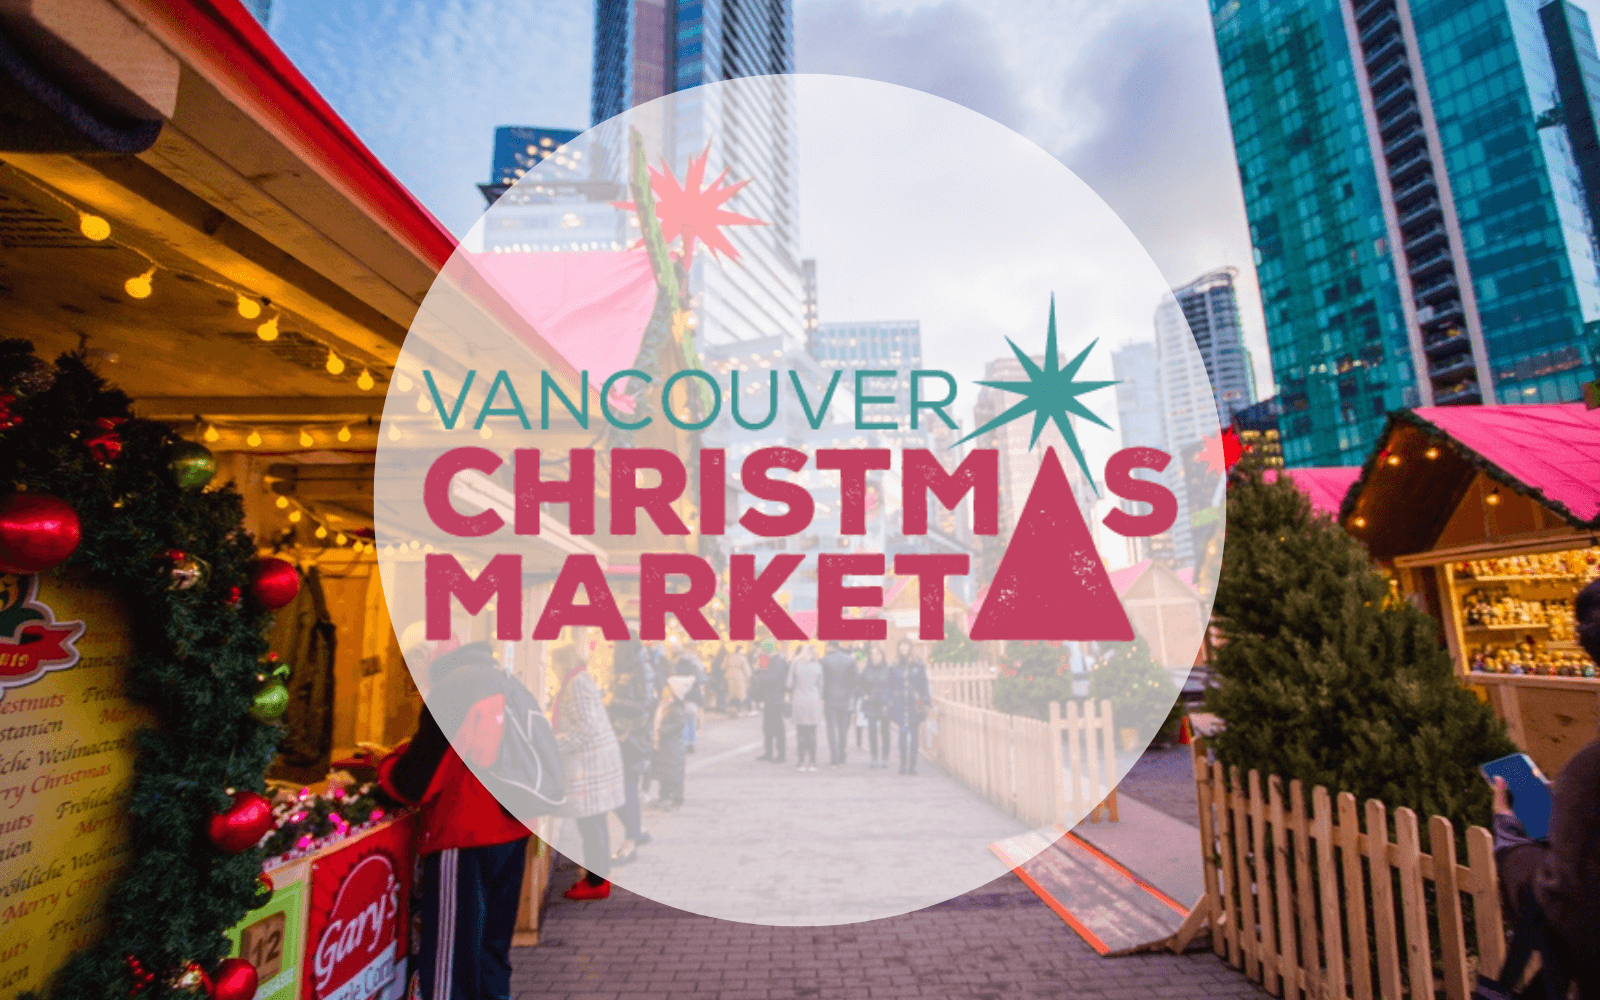 VISIT US AT THE VANCOUVER CHRISTMAS MARKET